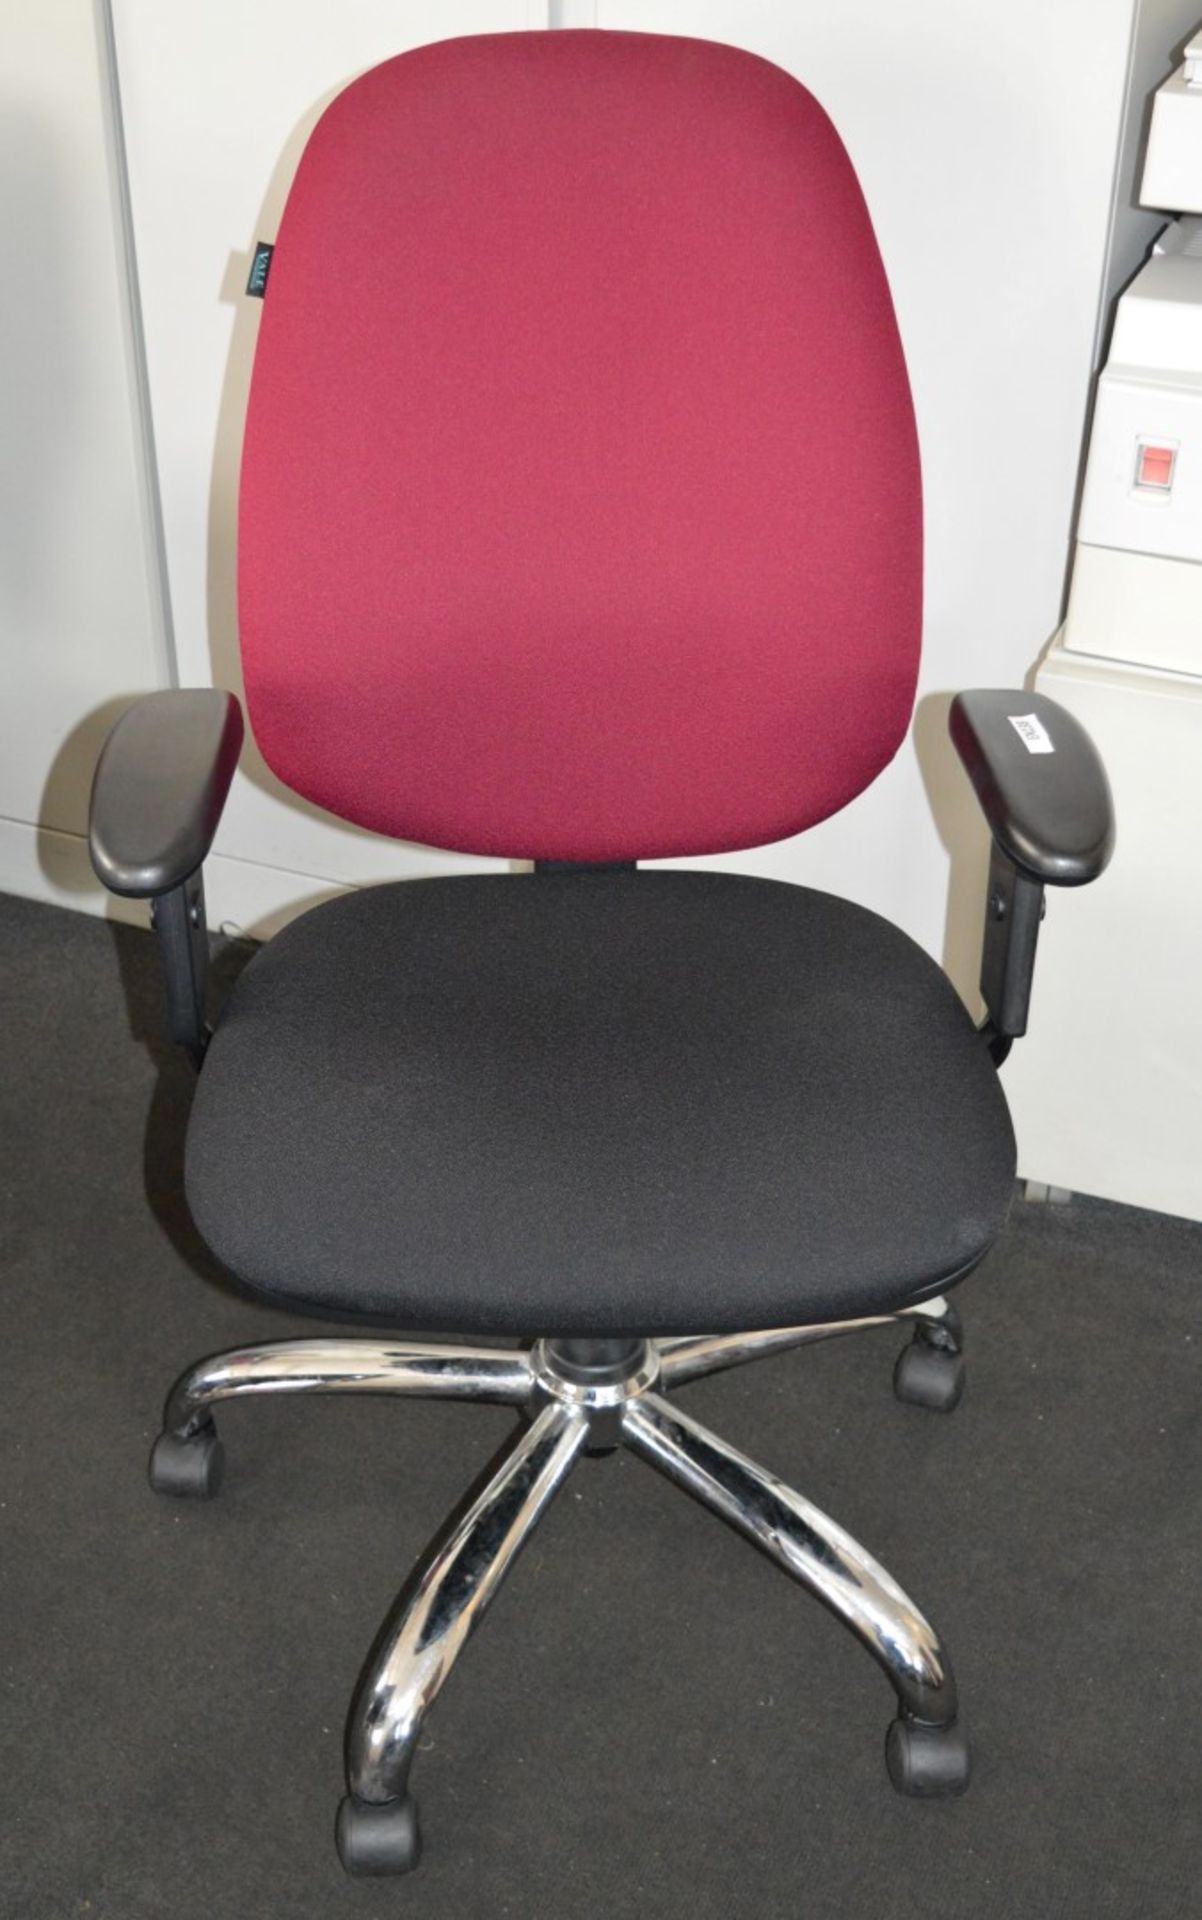 1 x Ergonomical Office Swivel Chair - Height and Tilt Adjustable - Hard Wearing Fabric With Chrome - Image 2 of 6